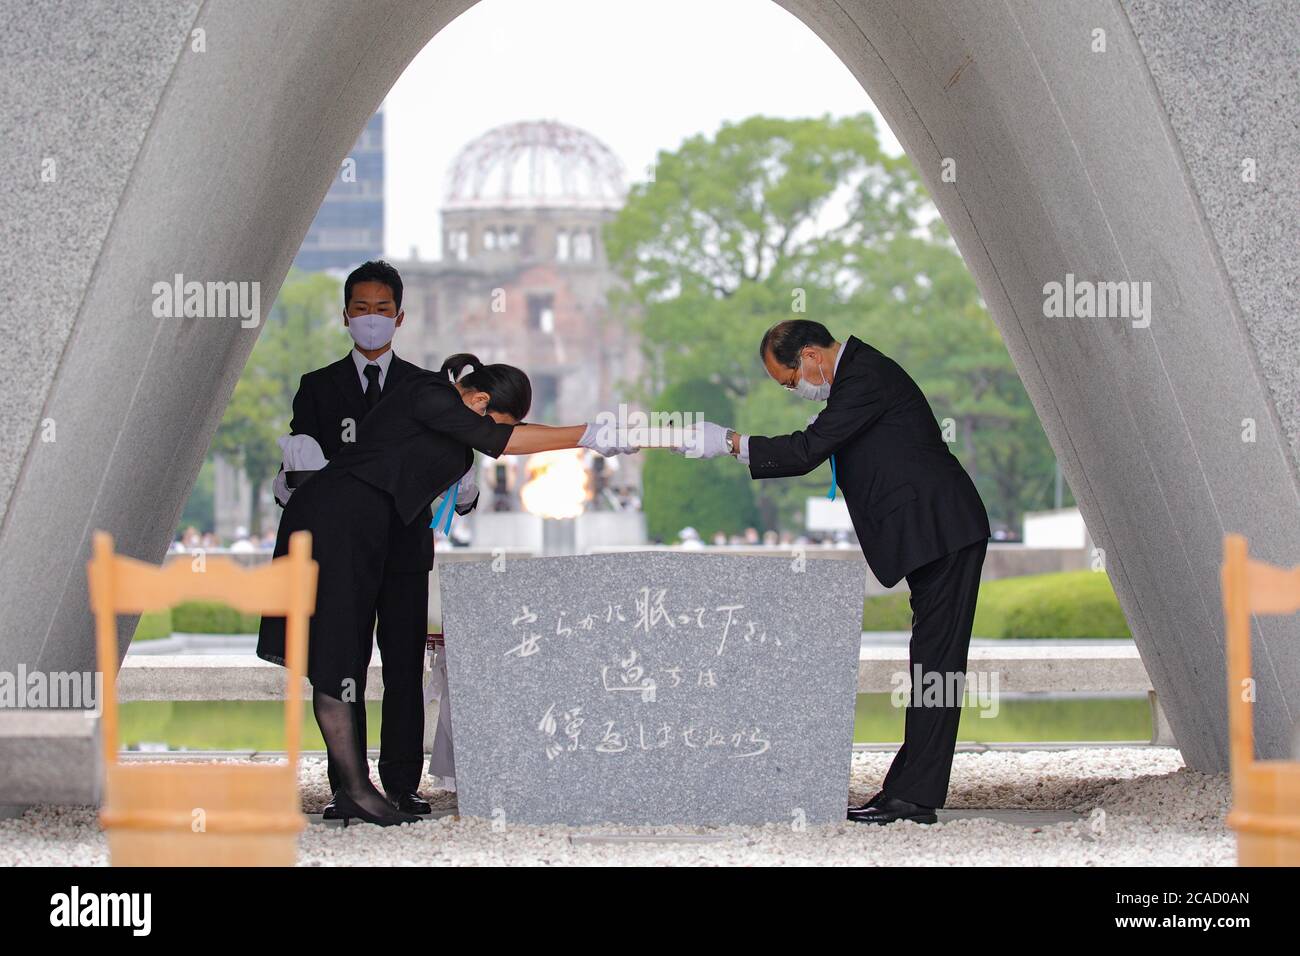 (200806) -- TOKYO, Aug. 6, 2020 (Xinhua) -- Hiroshima Mayor Kazumi Matsui (R) place the victim list of the atomic bombing at the Memorial Cenotaph in Hiroshima, Japan, Aug. 6, 2020. Japan marked the 75th anniversary of the atomic bombing of Hiroshima on Thursday, with its mayor urging the world to unite against threats to humanity including those from nuclear weapons. (The City of Hiroshima/Handout via Xinhua) Stock Photo